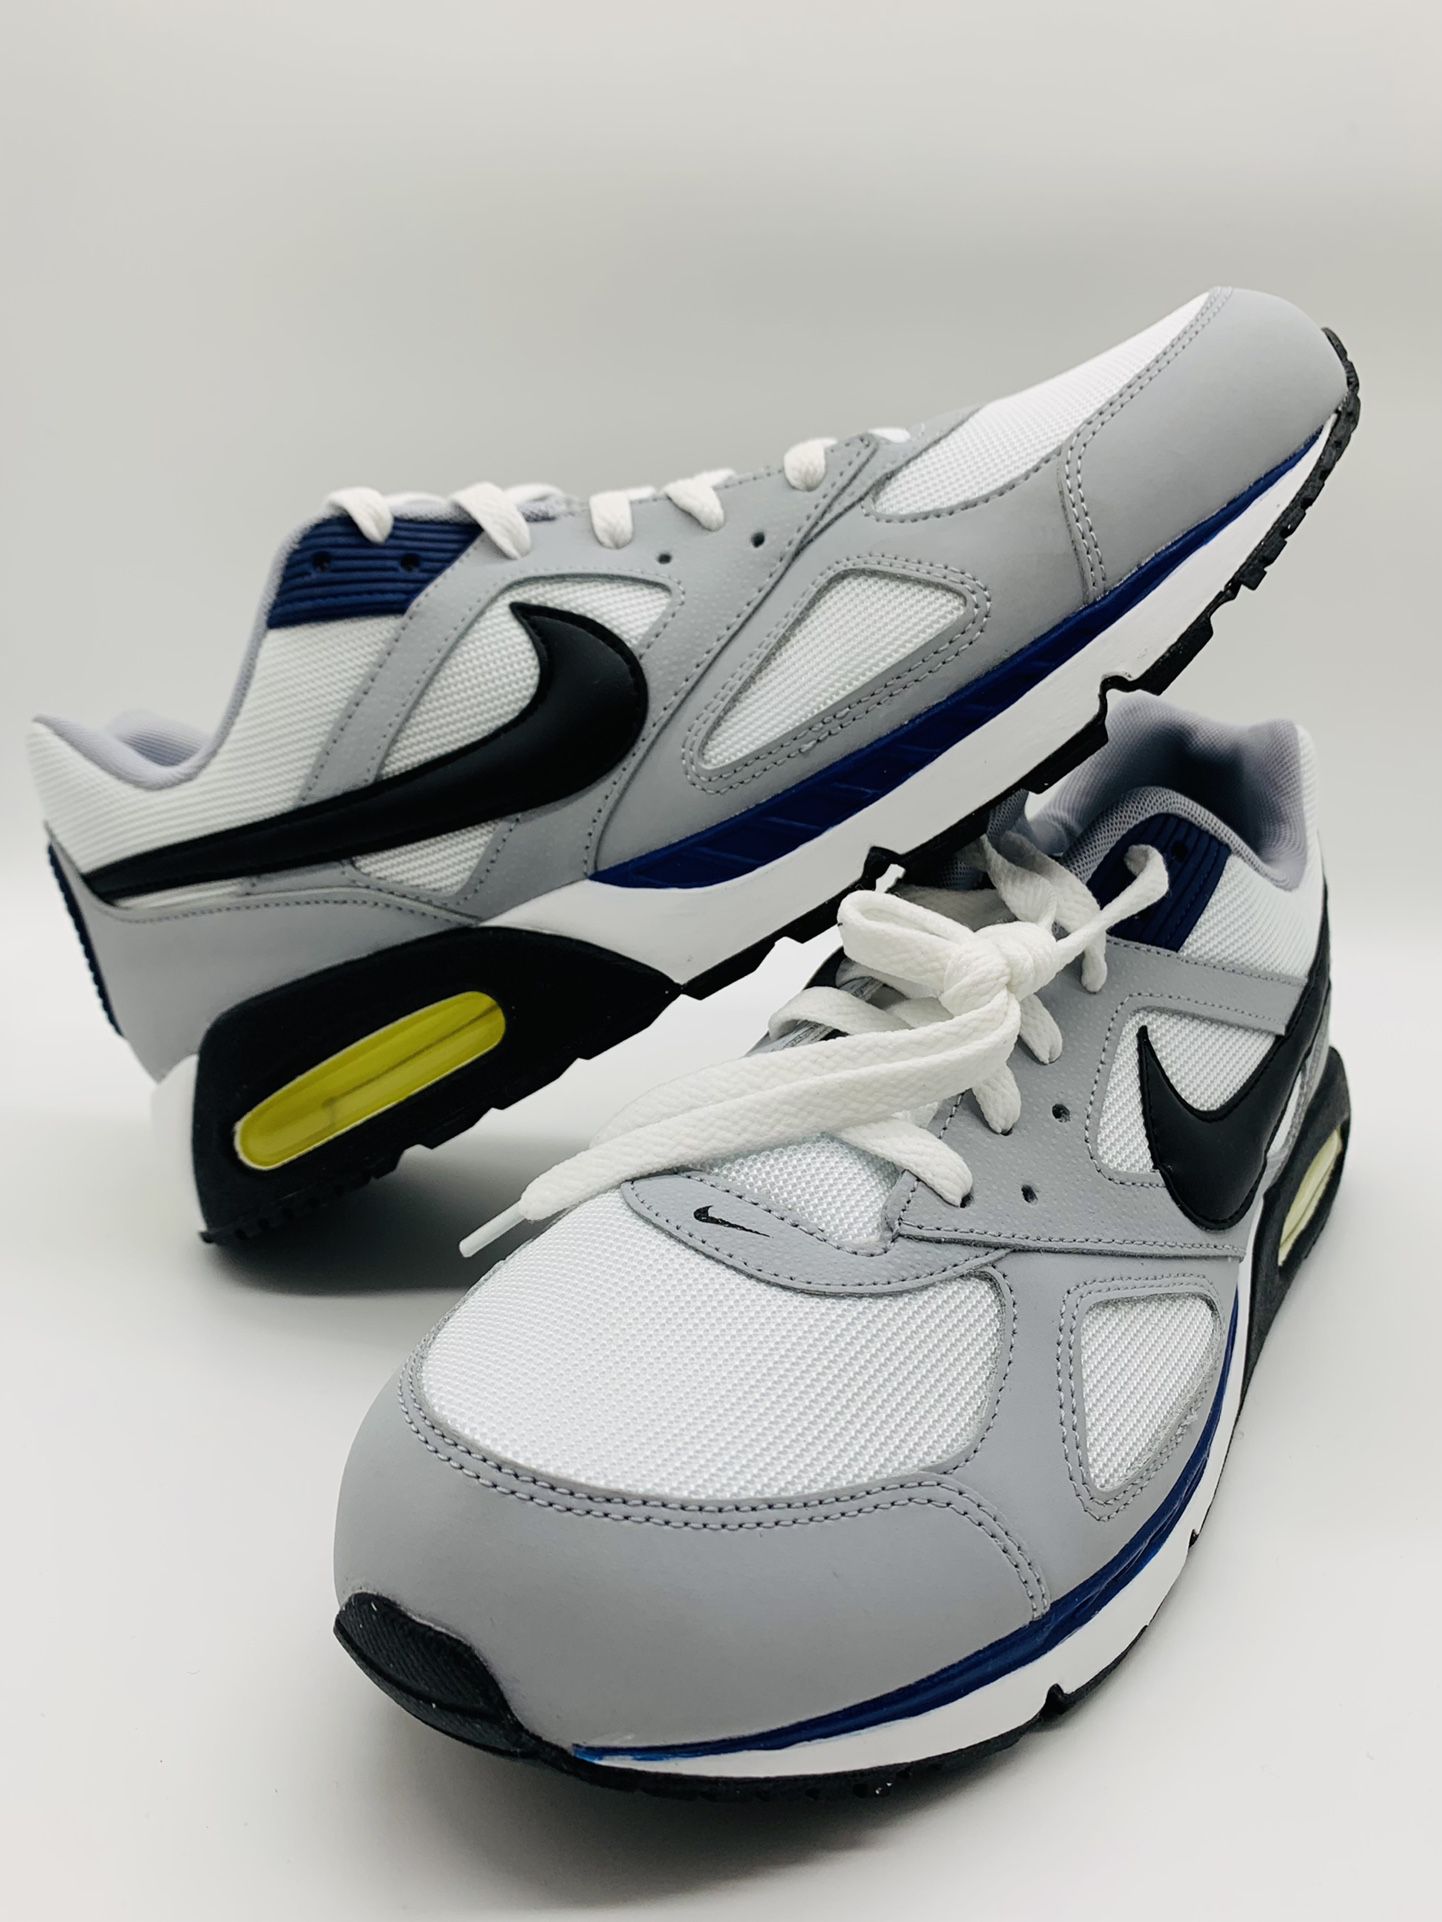 New !! NIKE AIR MAX IVO blue, gray, black Size 11.5 12 for Sale in San Diego, CA - OfferUp